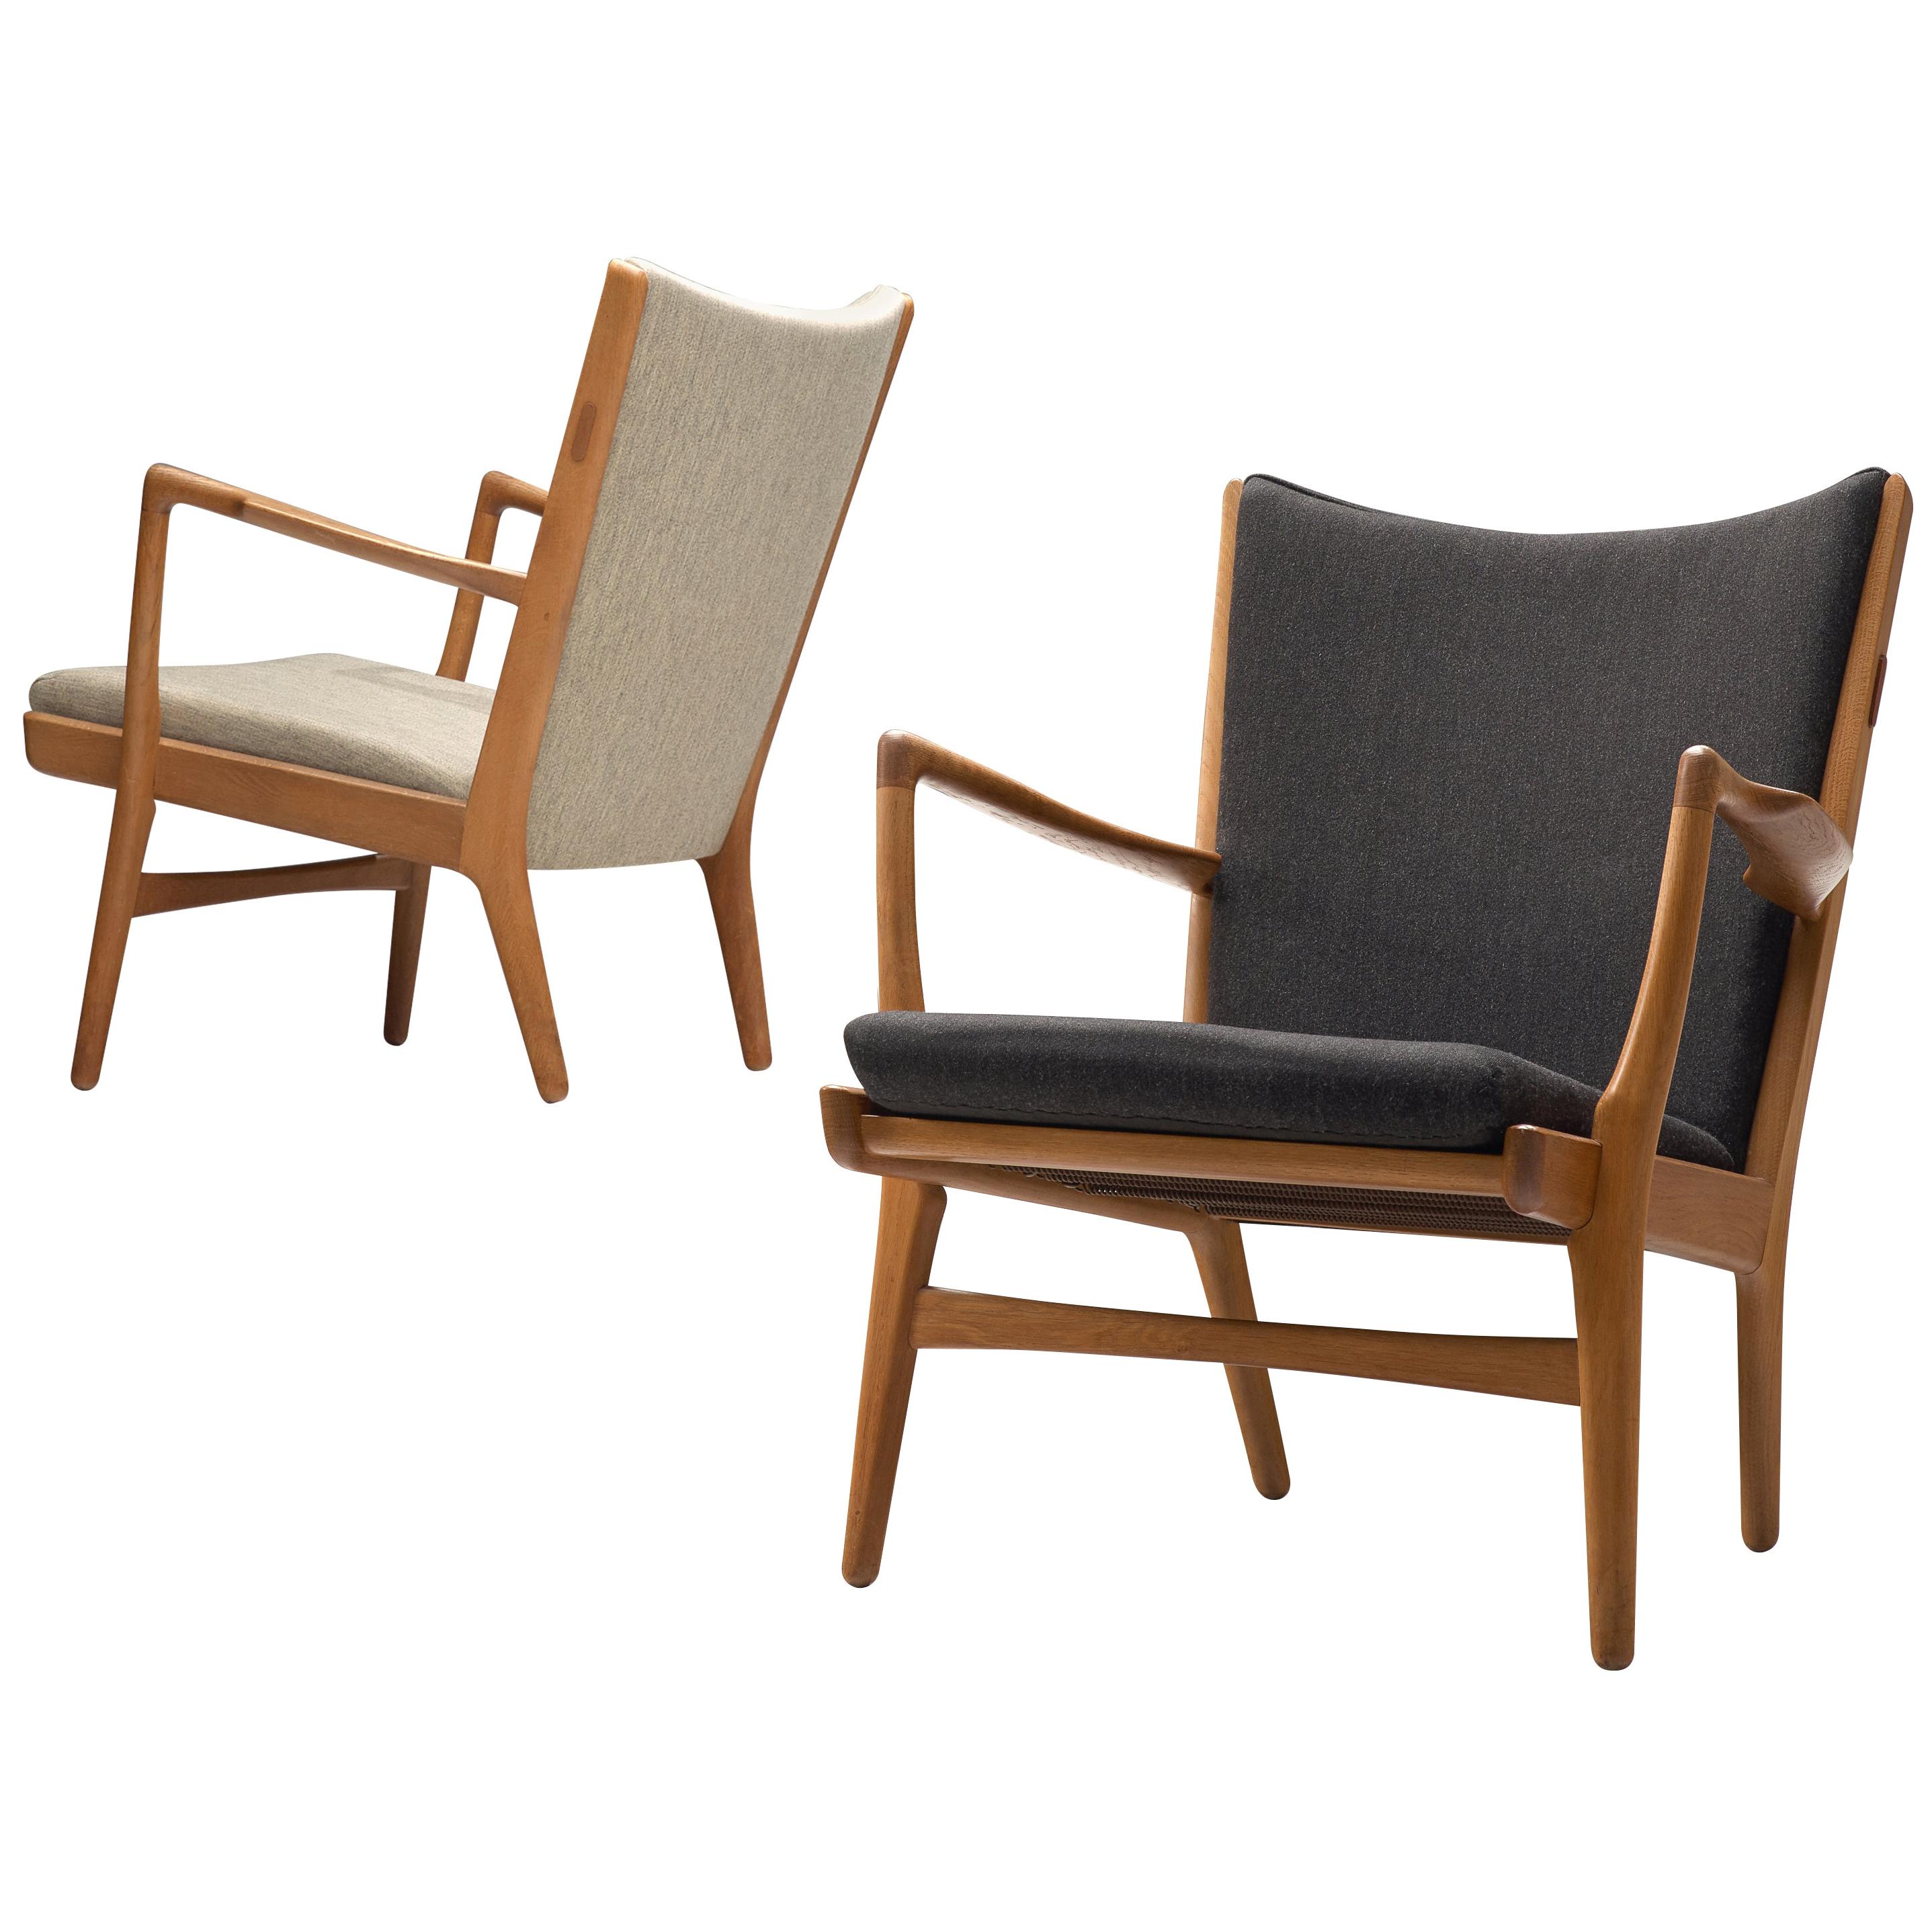 Hans Wegner Pair of 'AP-16' Lounge Chairs in Black and White Upholstery